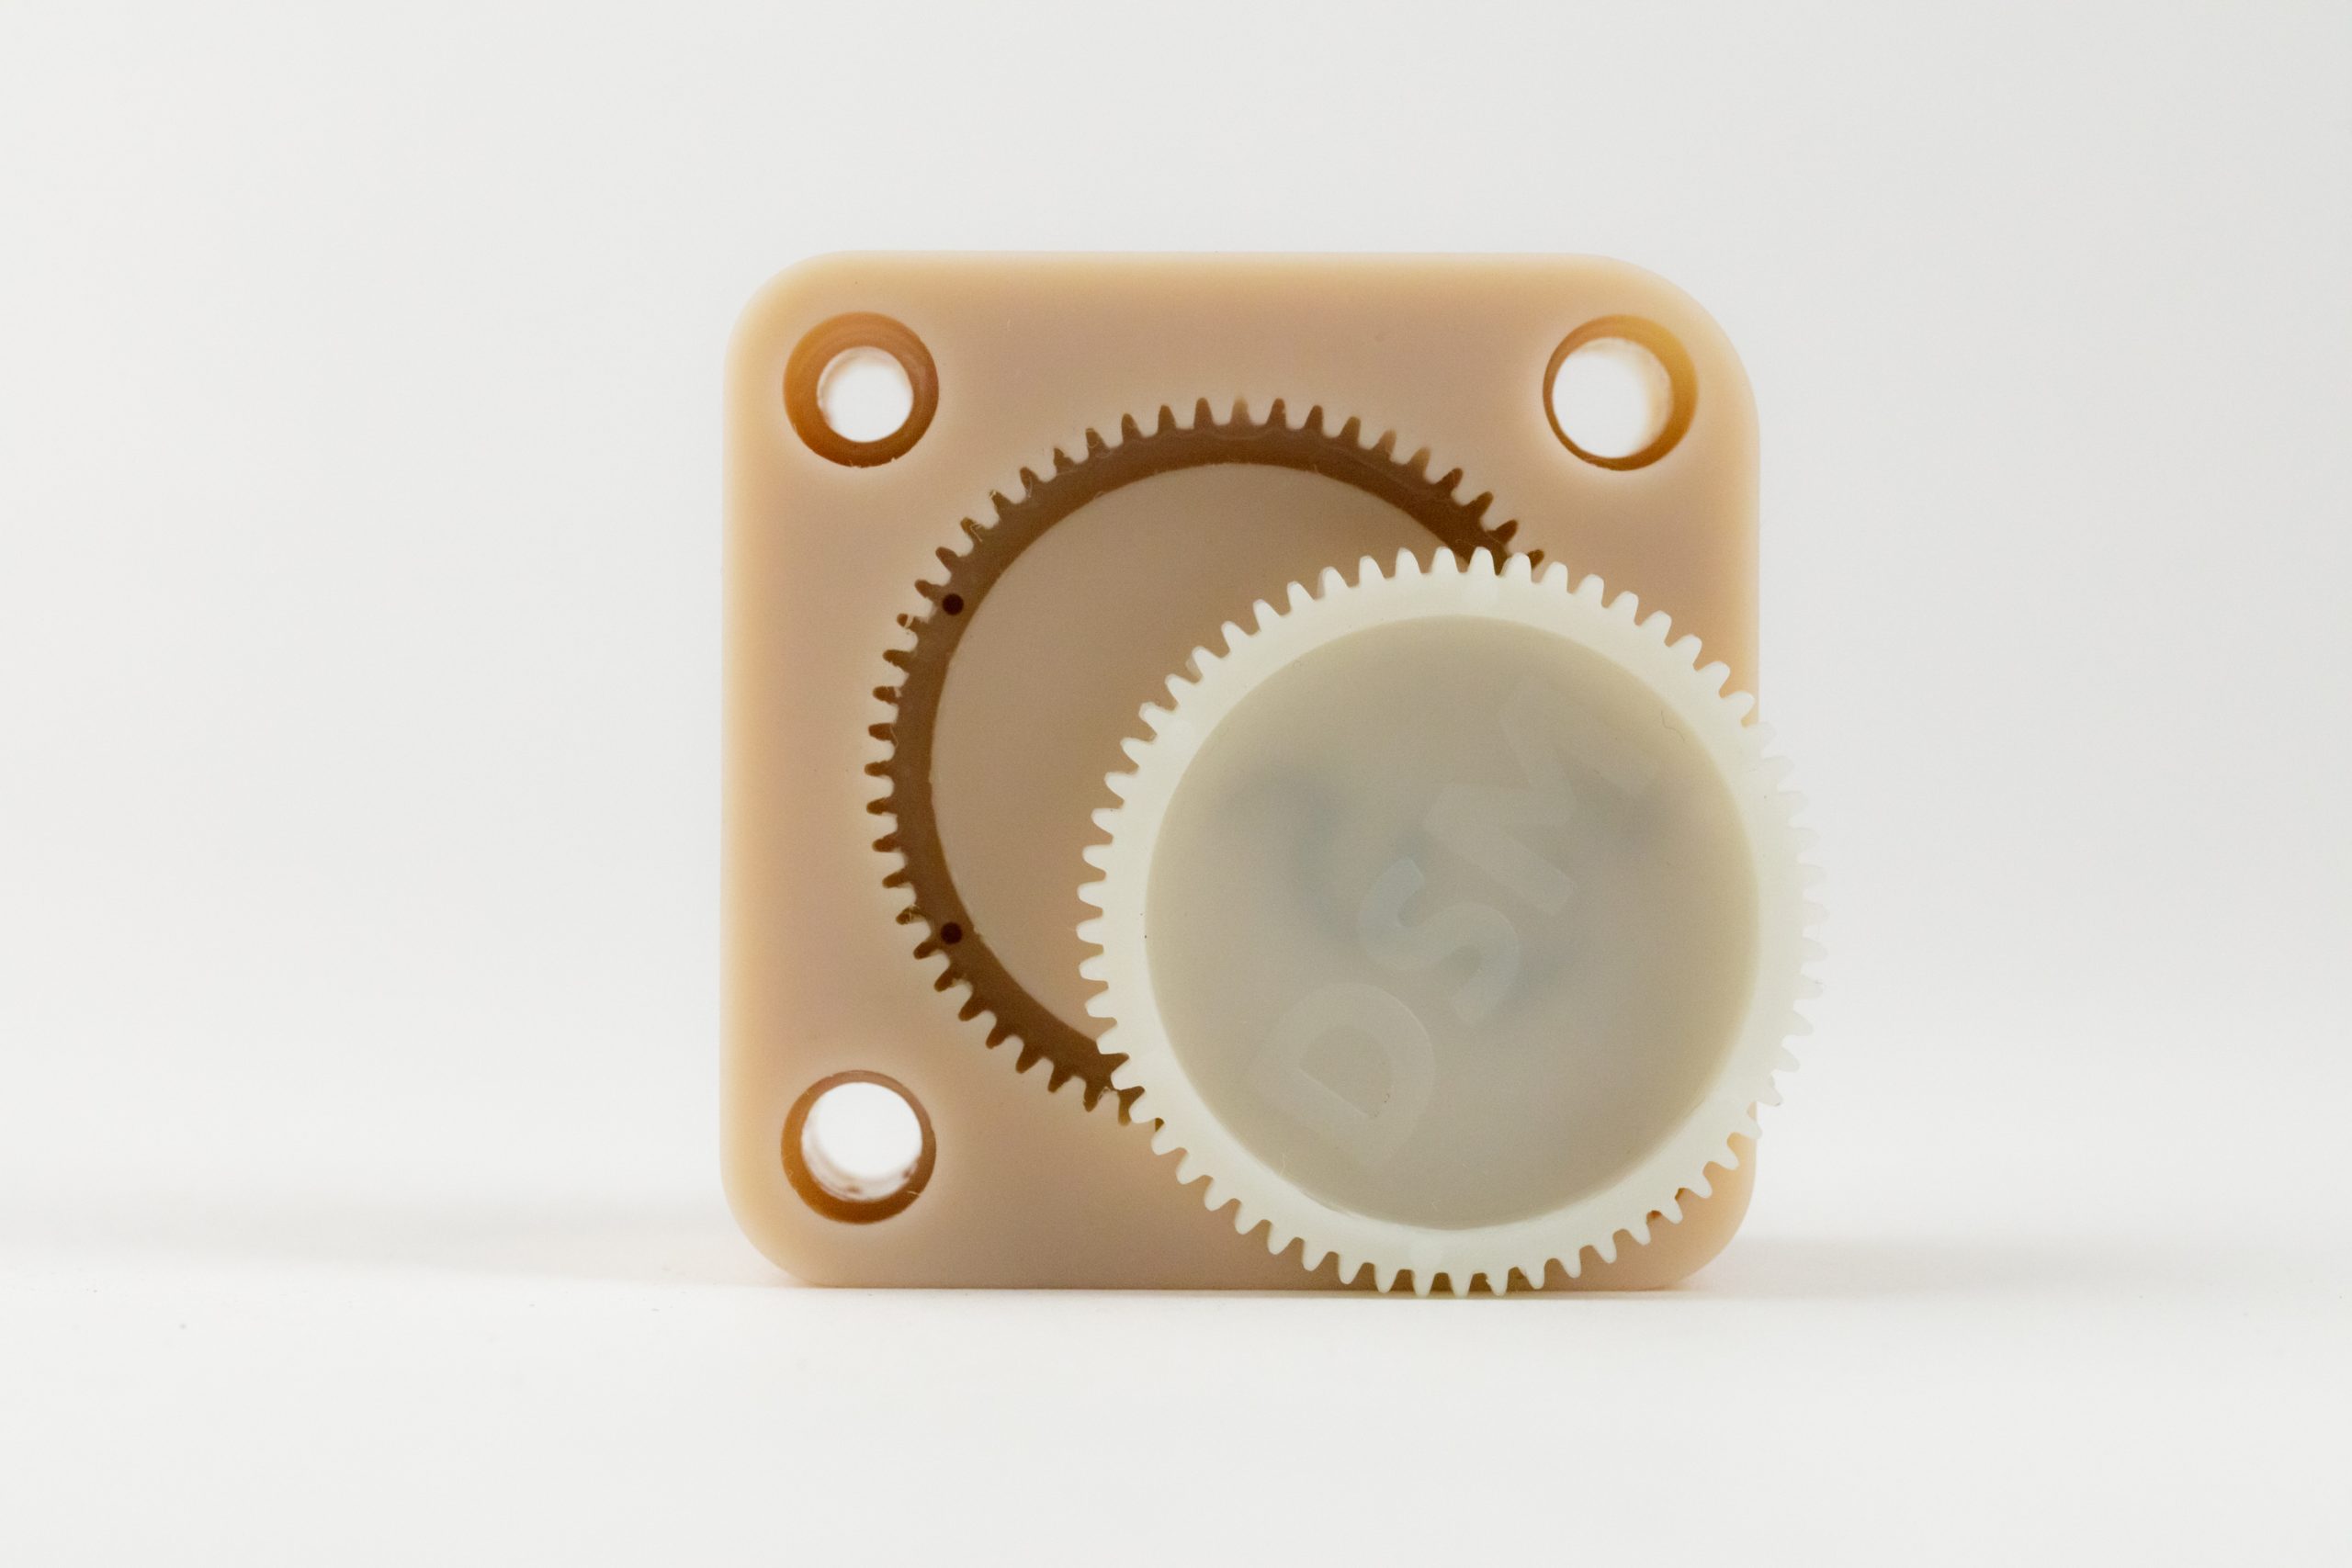 A tool used for injection molding glass-filled nylon gears 3D printed on EnvisionTEC’s Perfactory P4K series printer using the e-PerFORM resin. Photo via EnvisionTEC.